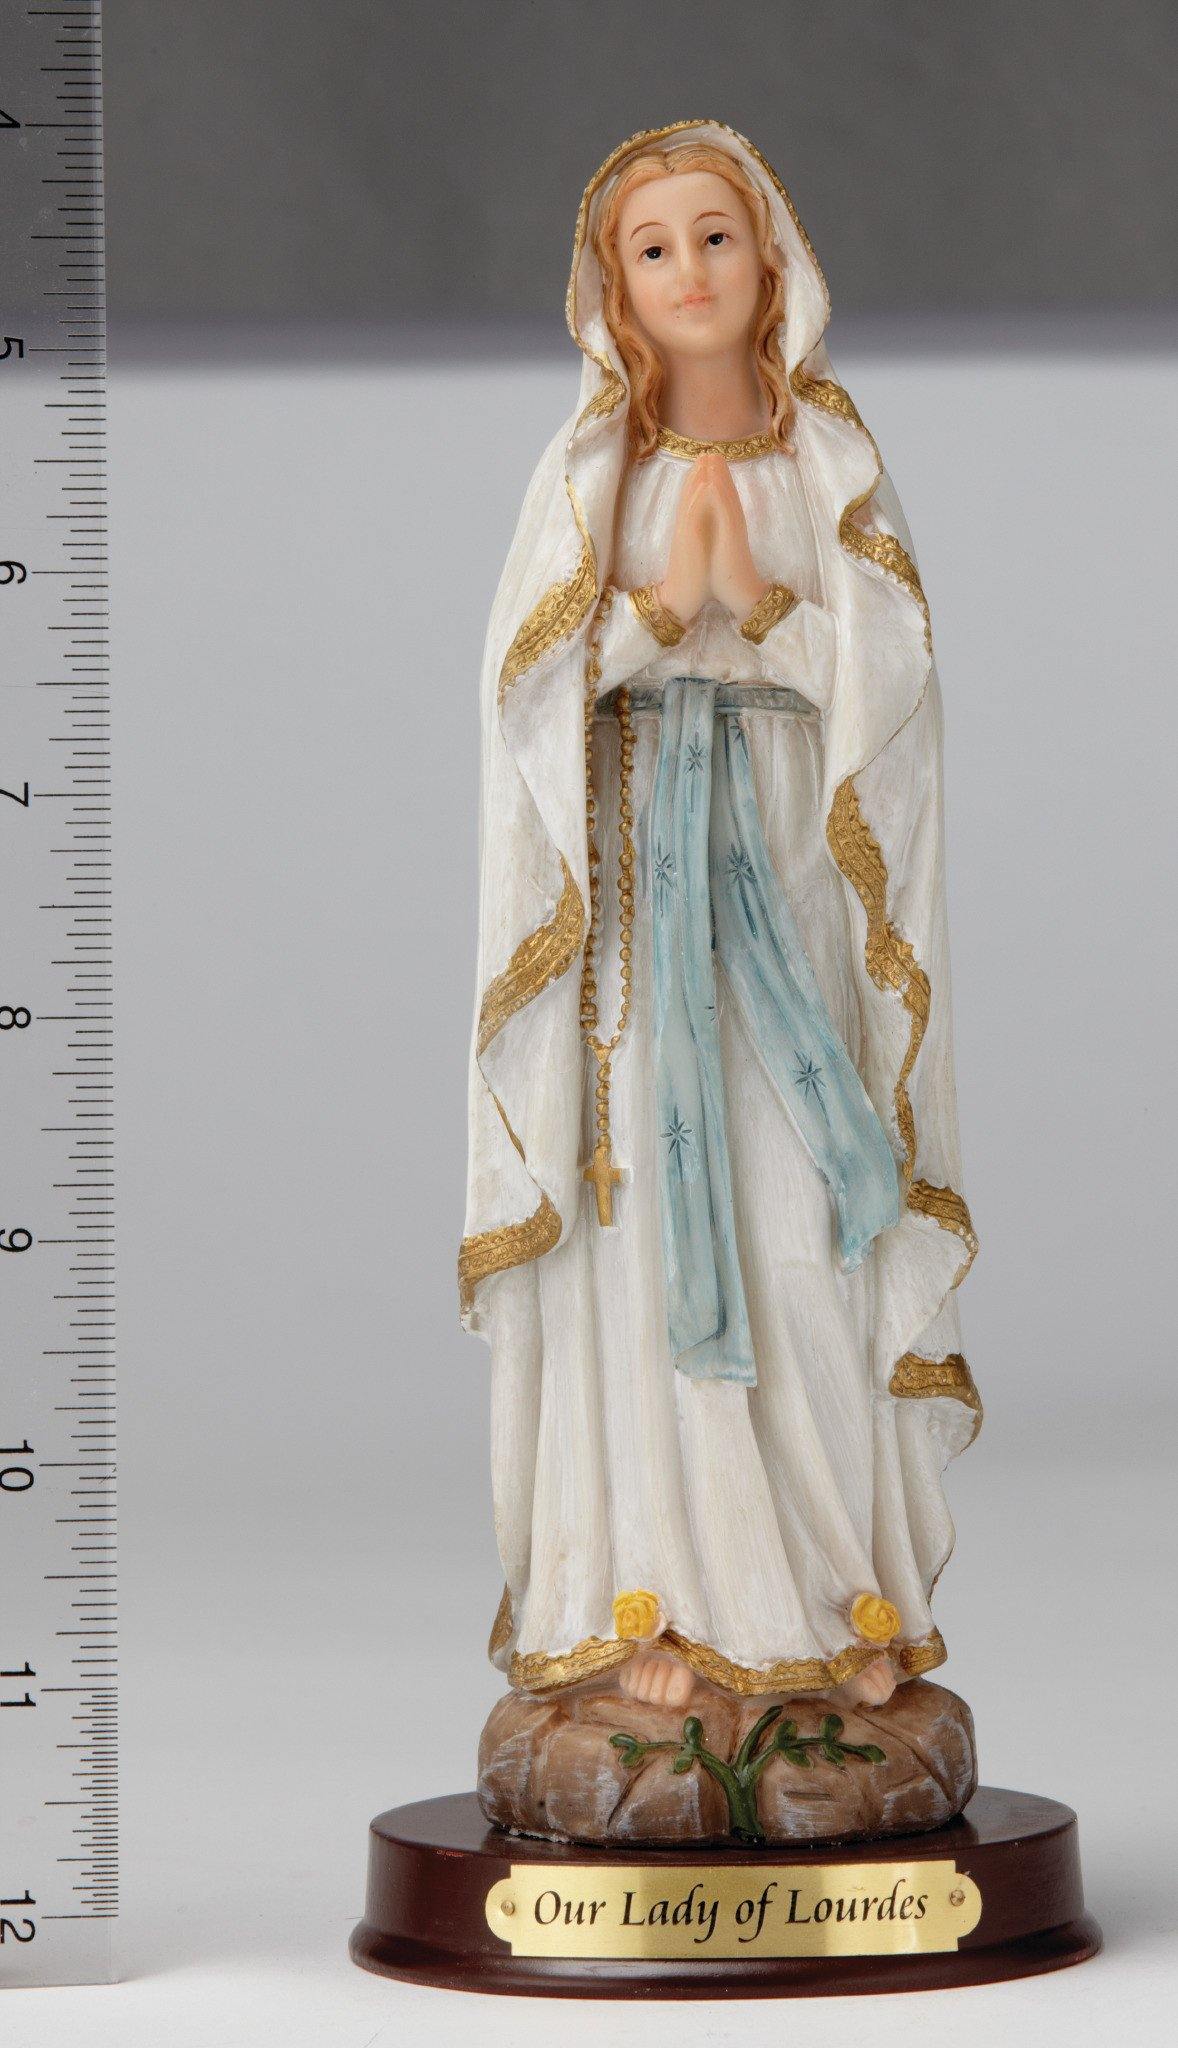 8" Our Lady of Lourdes Statue - Hand Painted - Religious Art - Chiarelli's Religious Goods & Church Supply